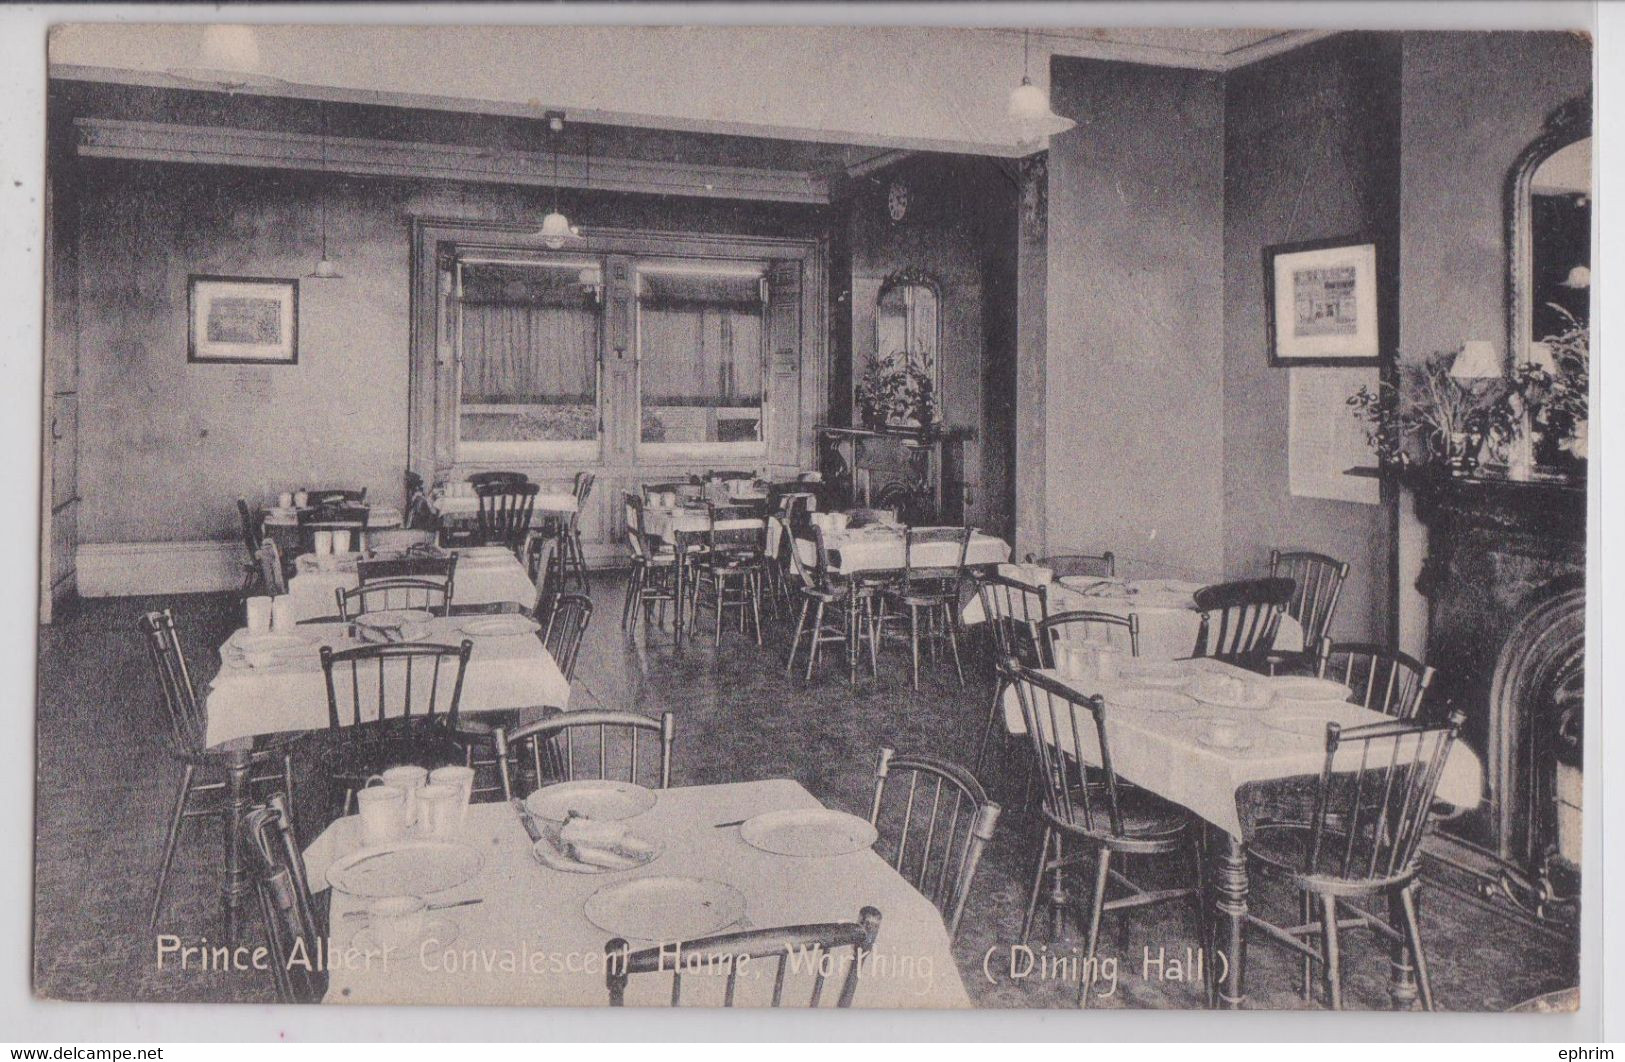 WORTHING (Sussex) - Prince Albert Convalescent Home Dining Hall - Worthing